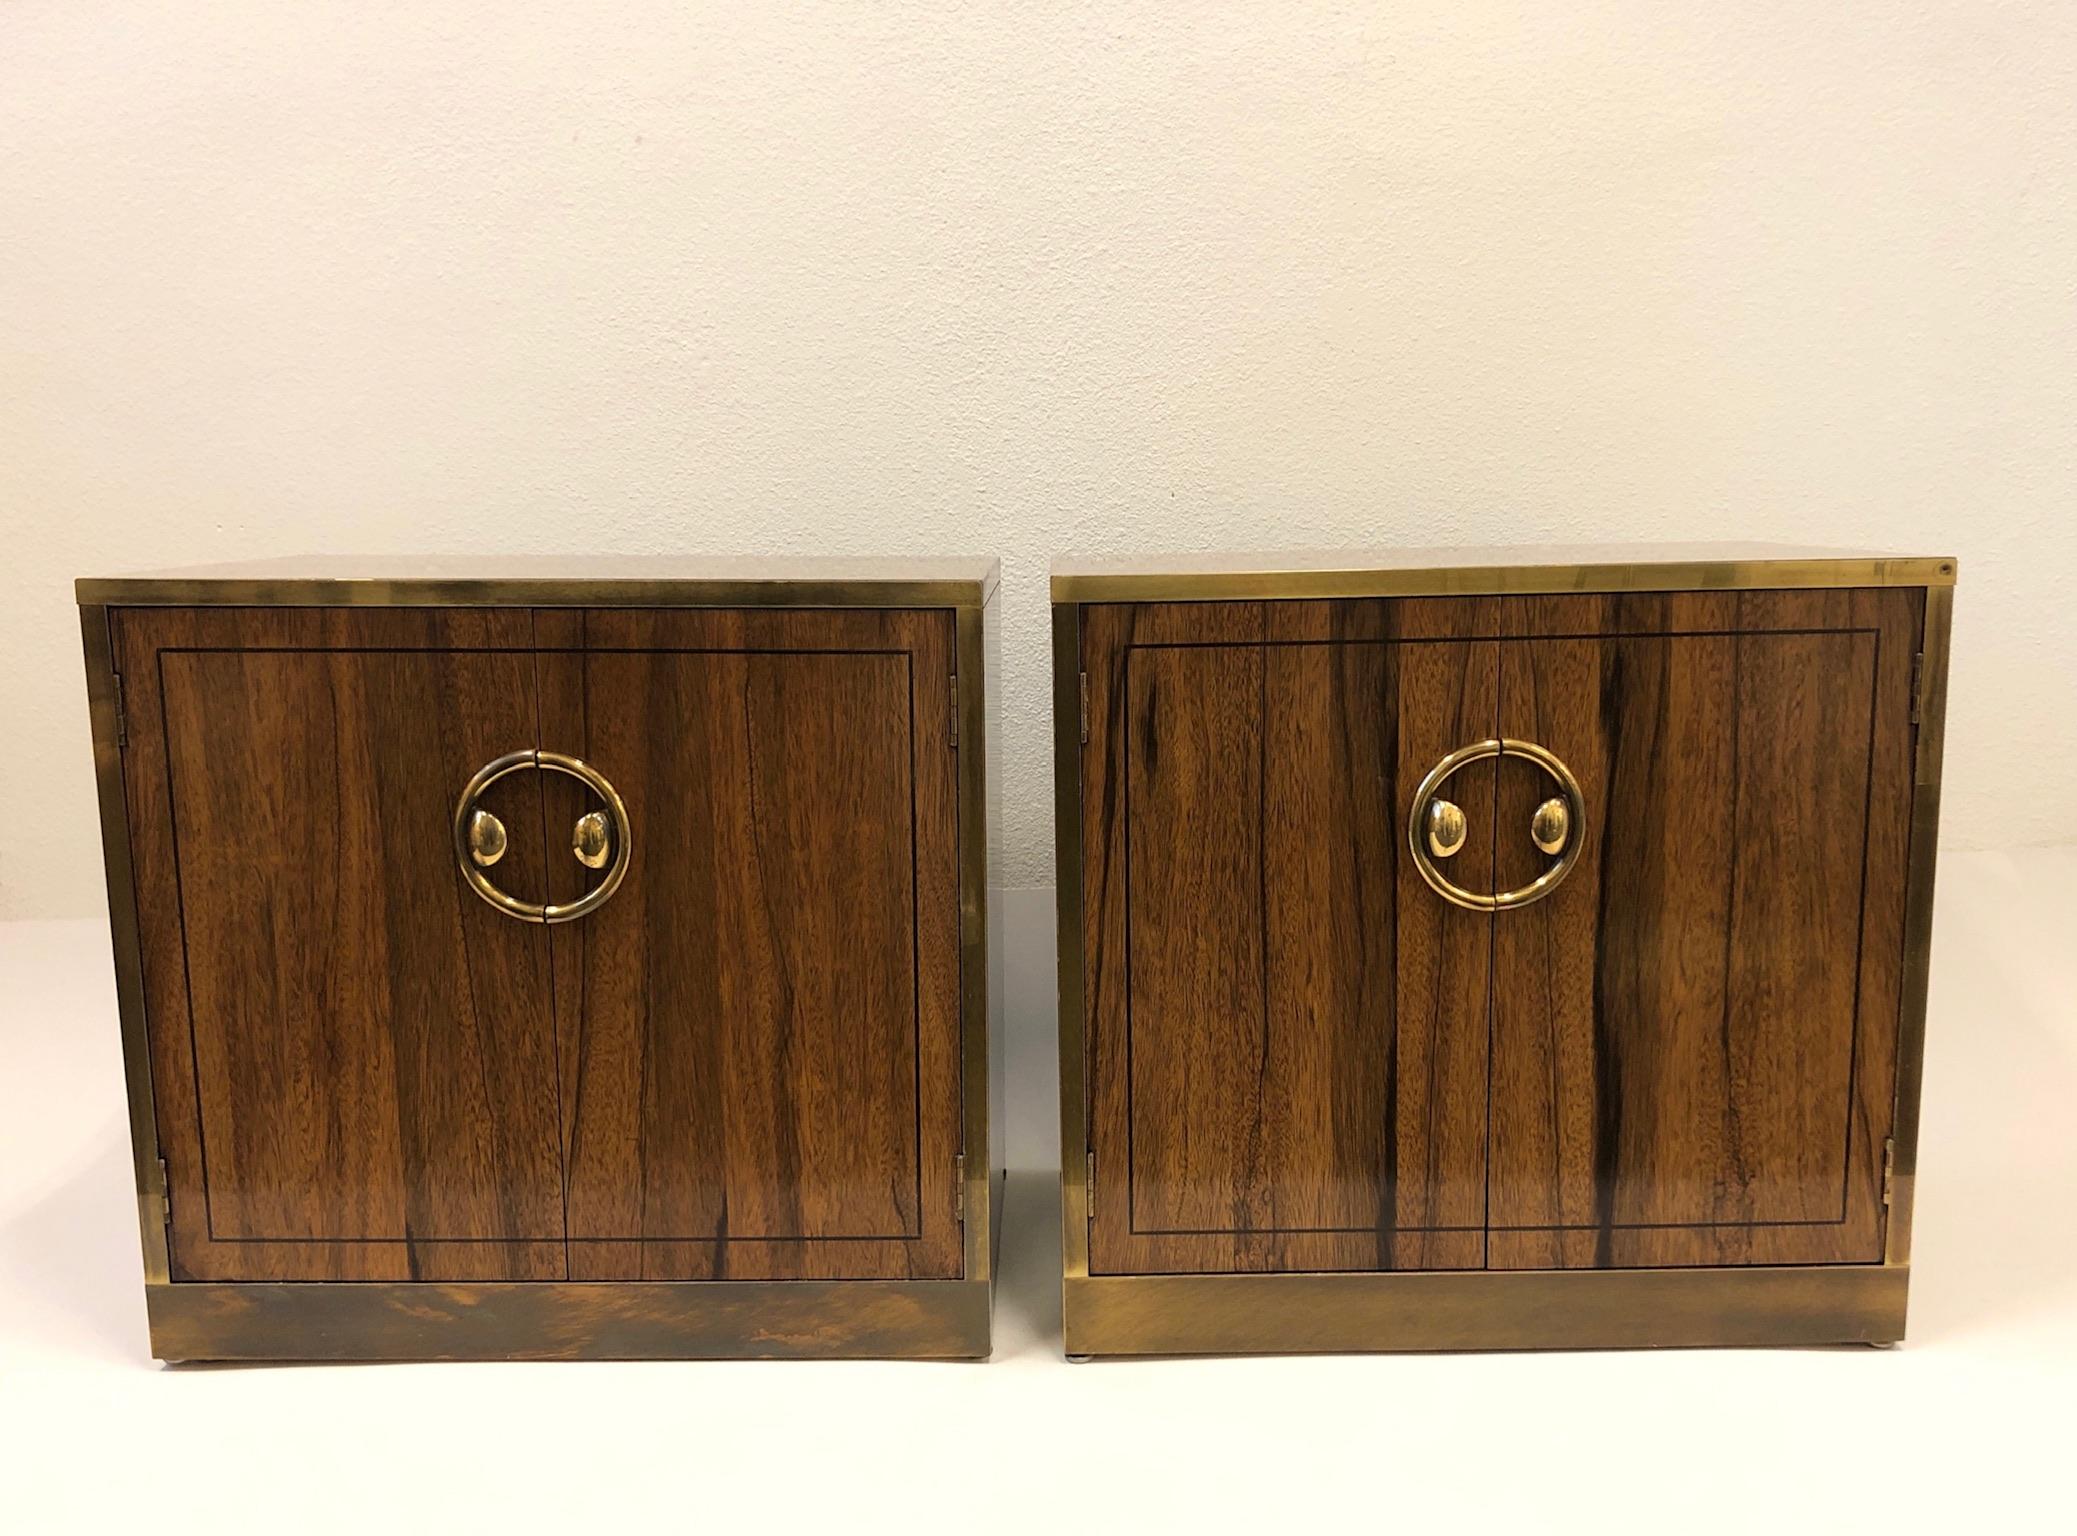 A beautiful pair of nightstands designed by Mastercraft in the 1970s. The nightstands are constructed of dark walnut wood with a zebra wood veneer and aged brass on the outside. Each nightstand have one shelf. The nightstands shows minor age, but no